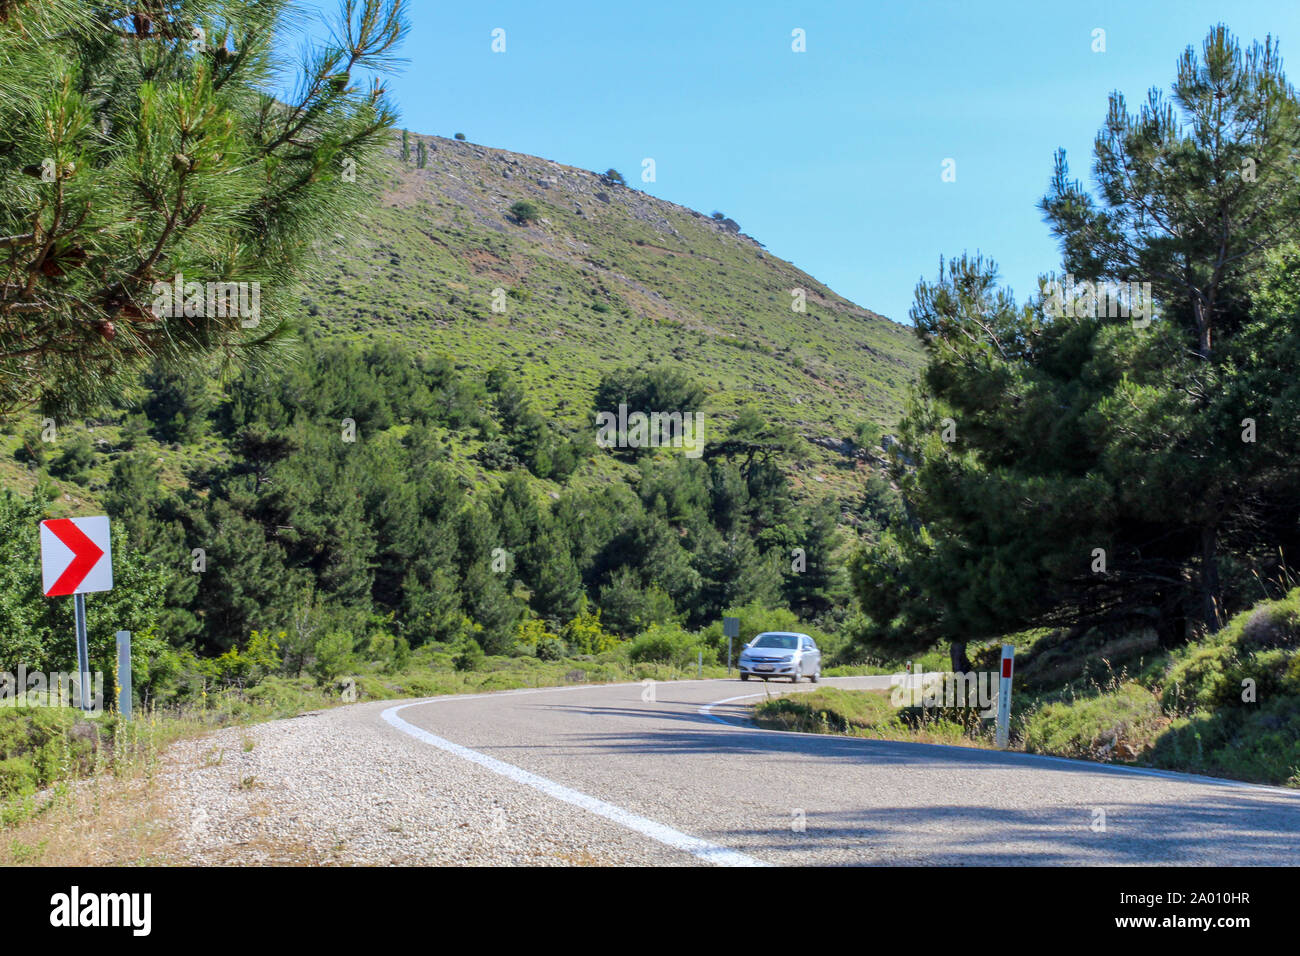 Car on asphalt island road, about to  cornering. Road lined with trees and mountains around Stock Photo